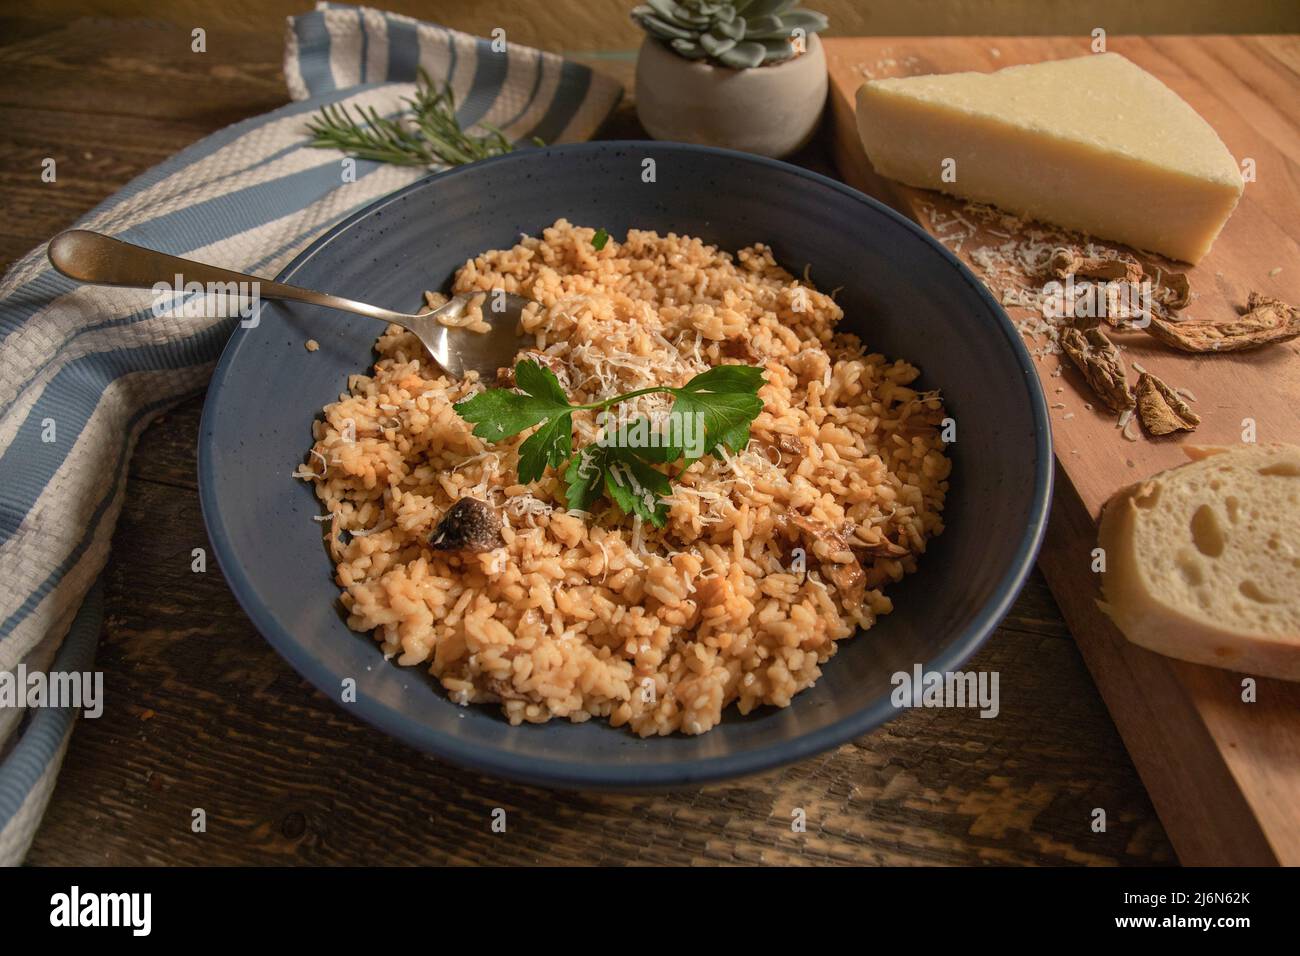 Bowl of Risotto with Cheese, Dried Porcini Mushrooms and Fresh Bread on a natural wood table. Stock Photo